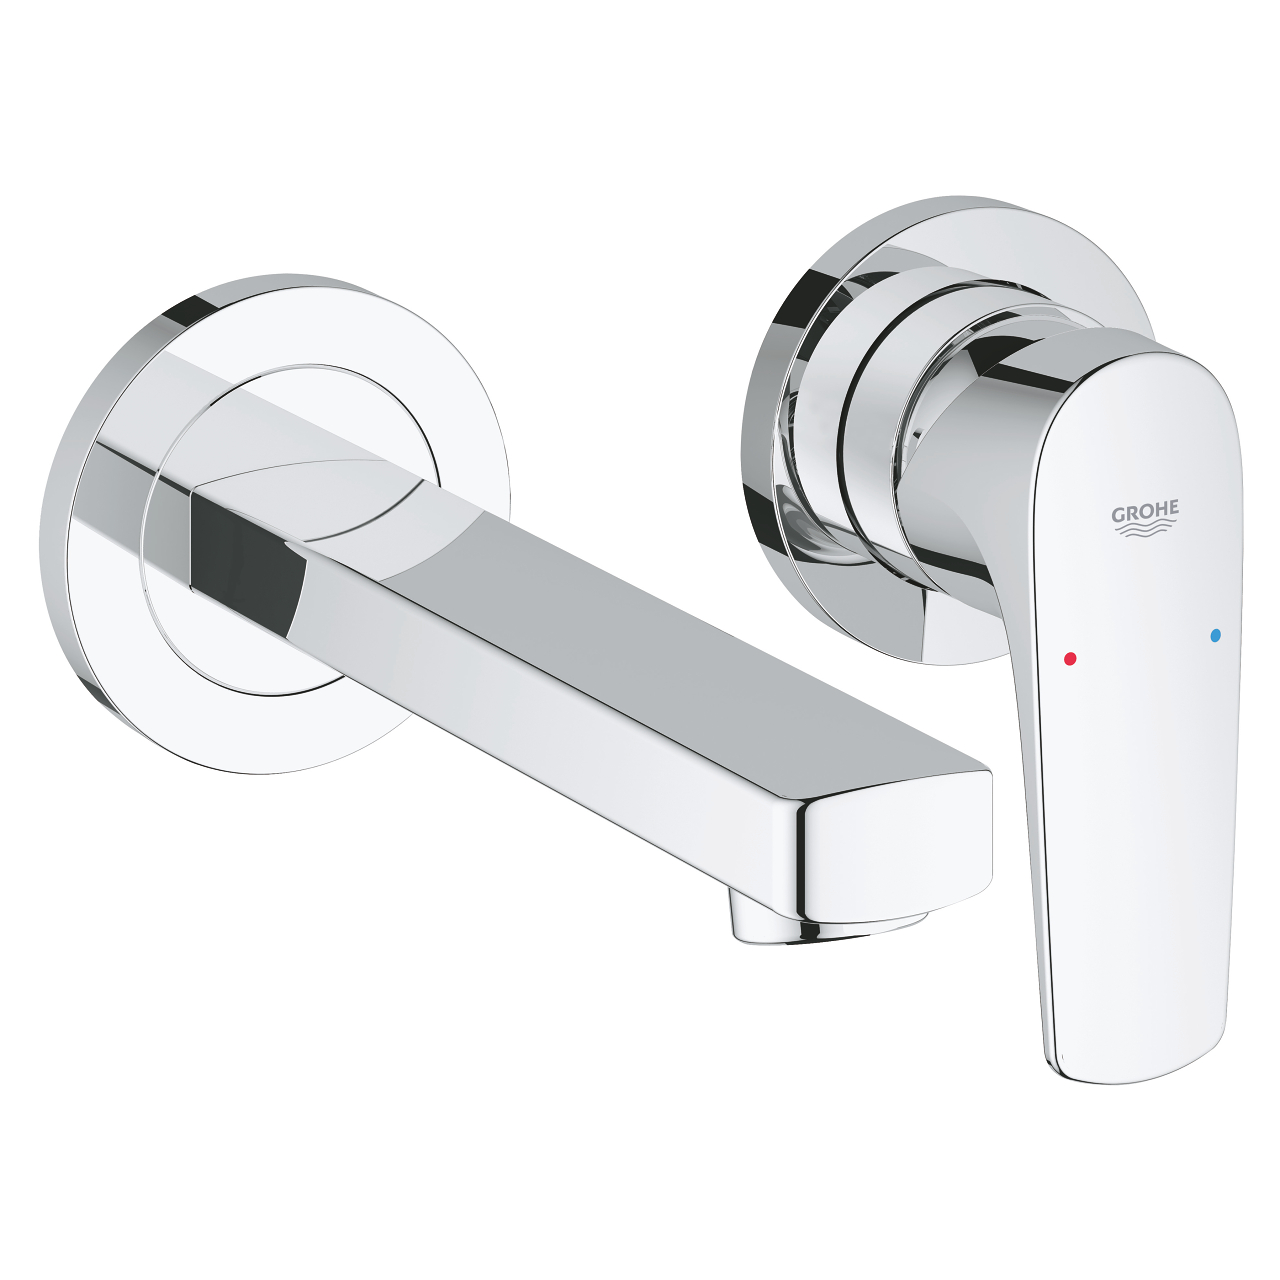 GROHE BAUFLOW TWO-HOLE BASIN MIXER